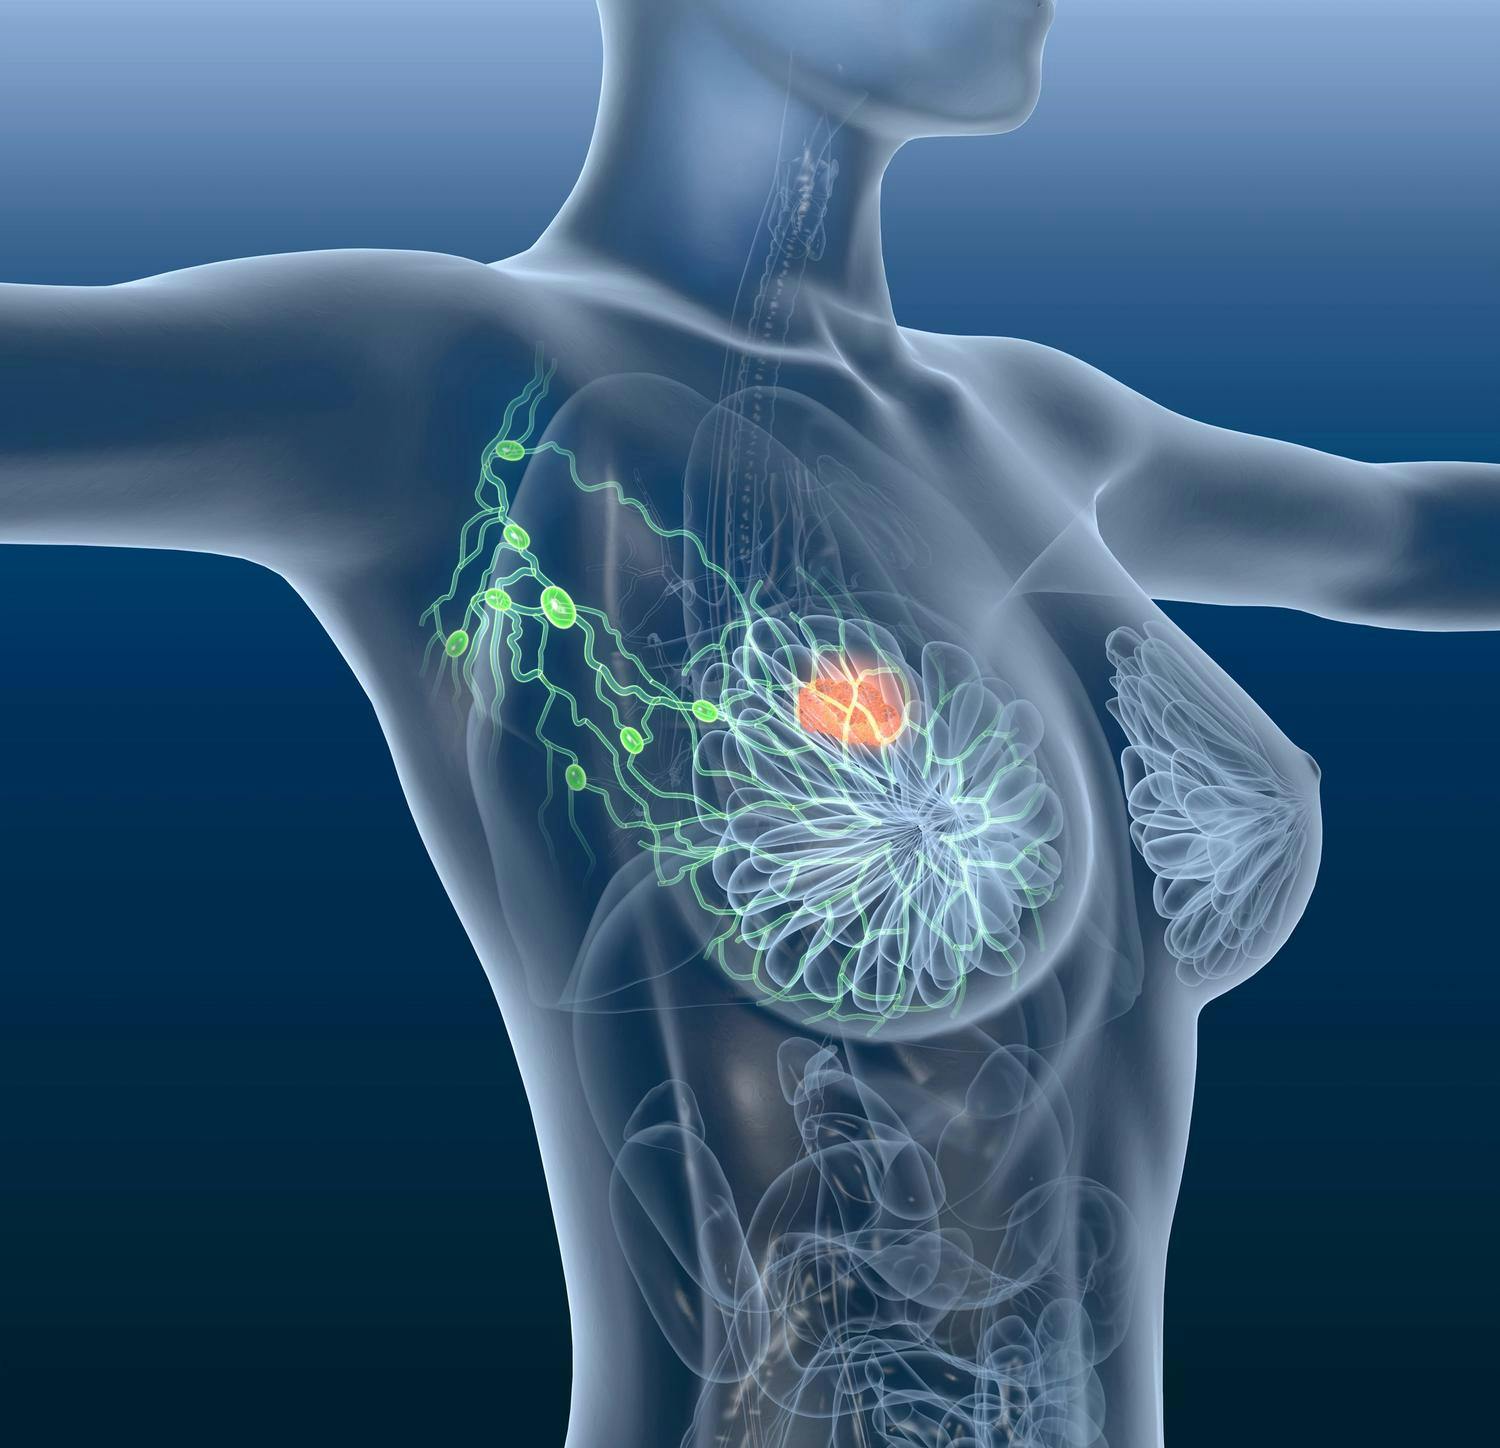  Premenopausal ER+ breast cancer recurrence reduced significantly with aromatase inhibitors